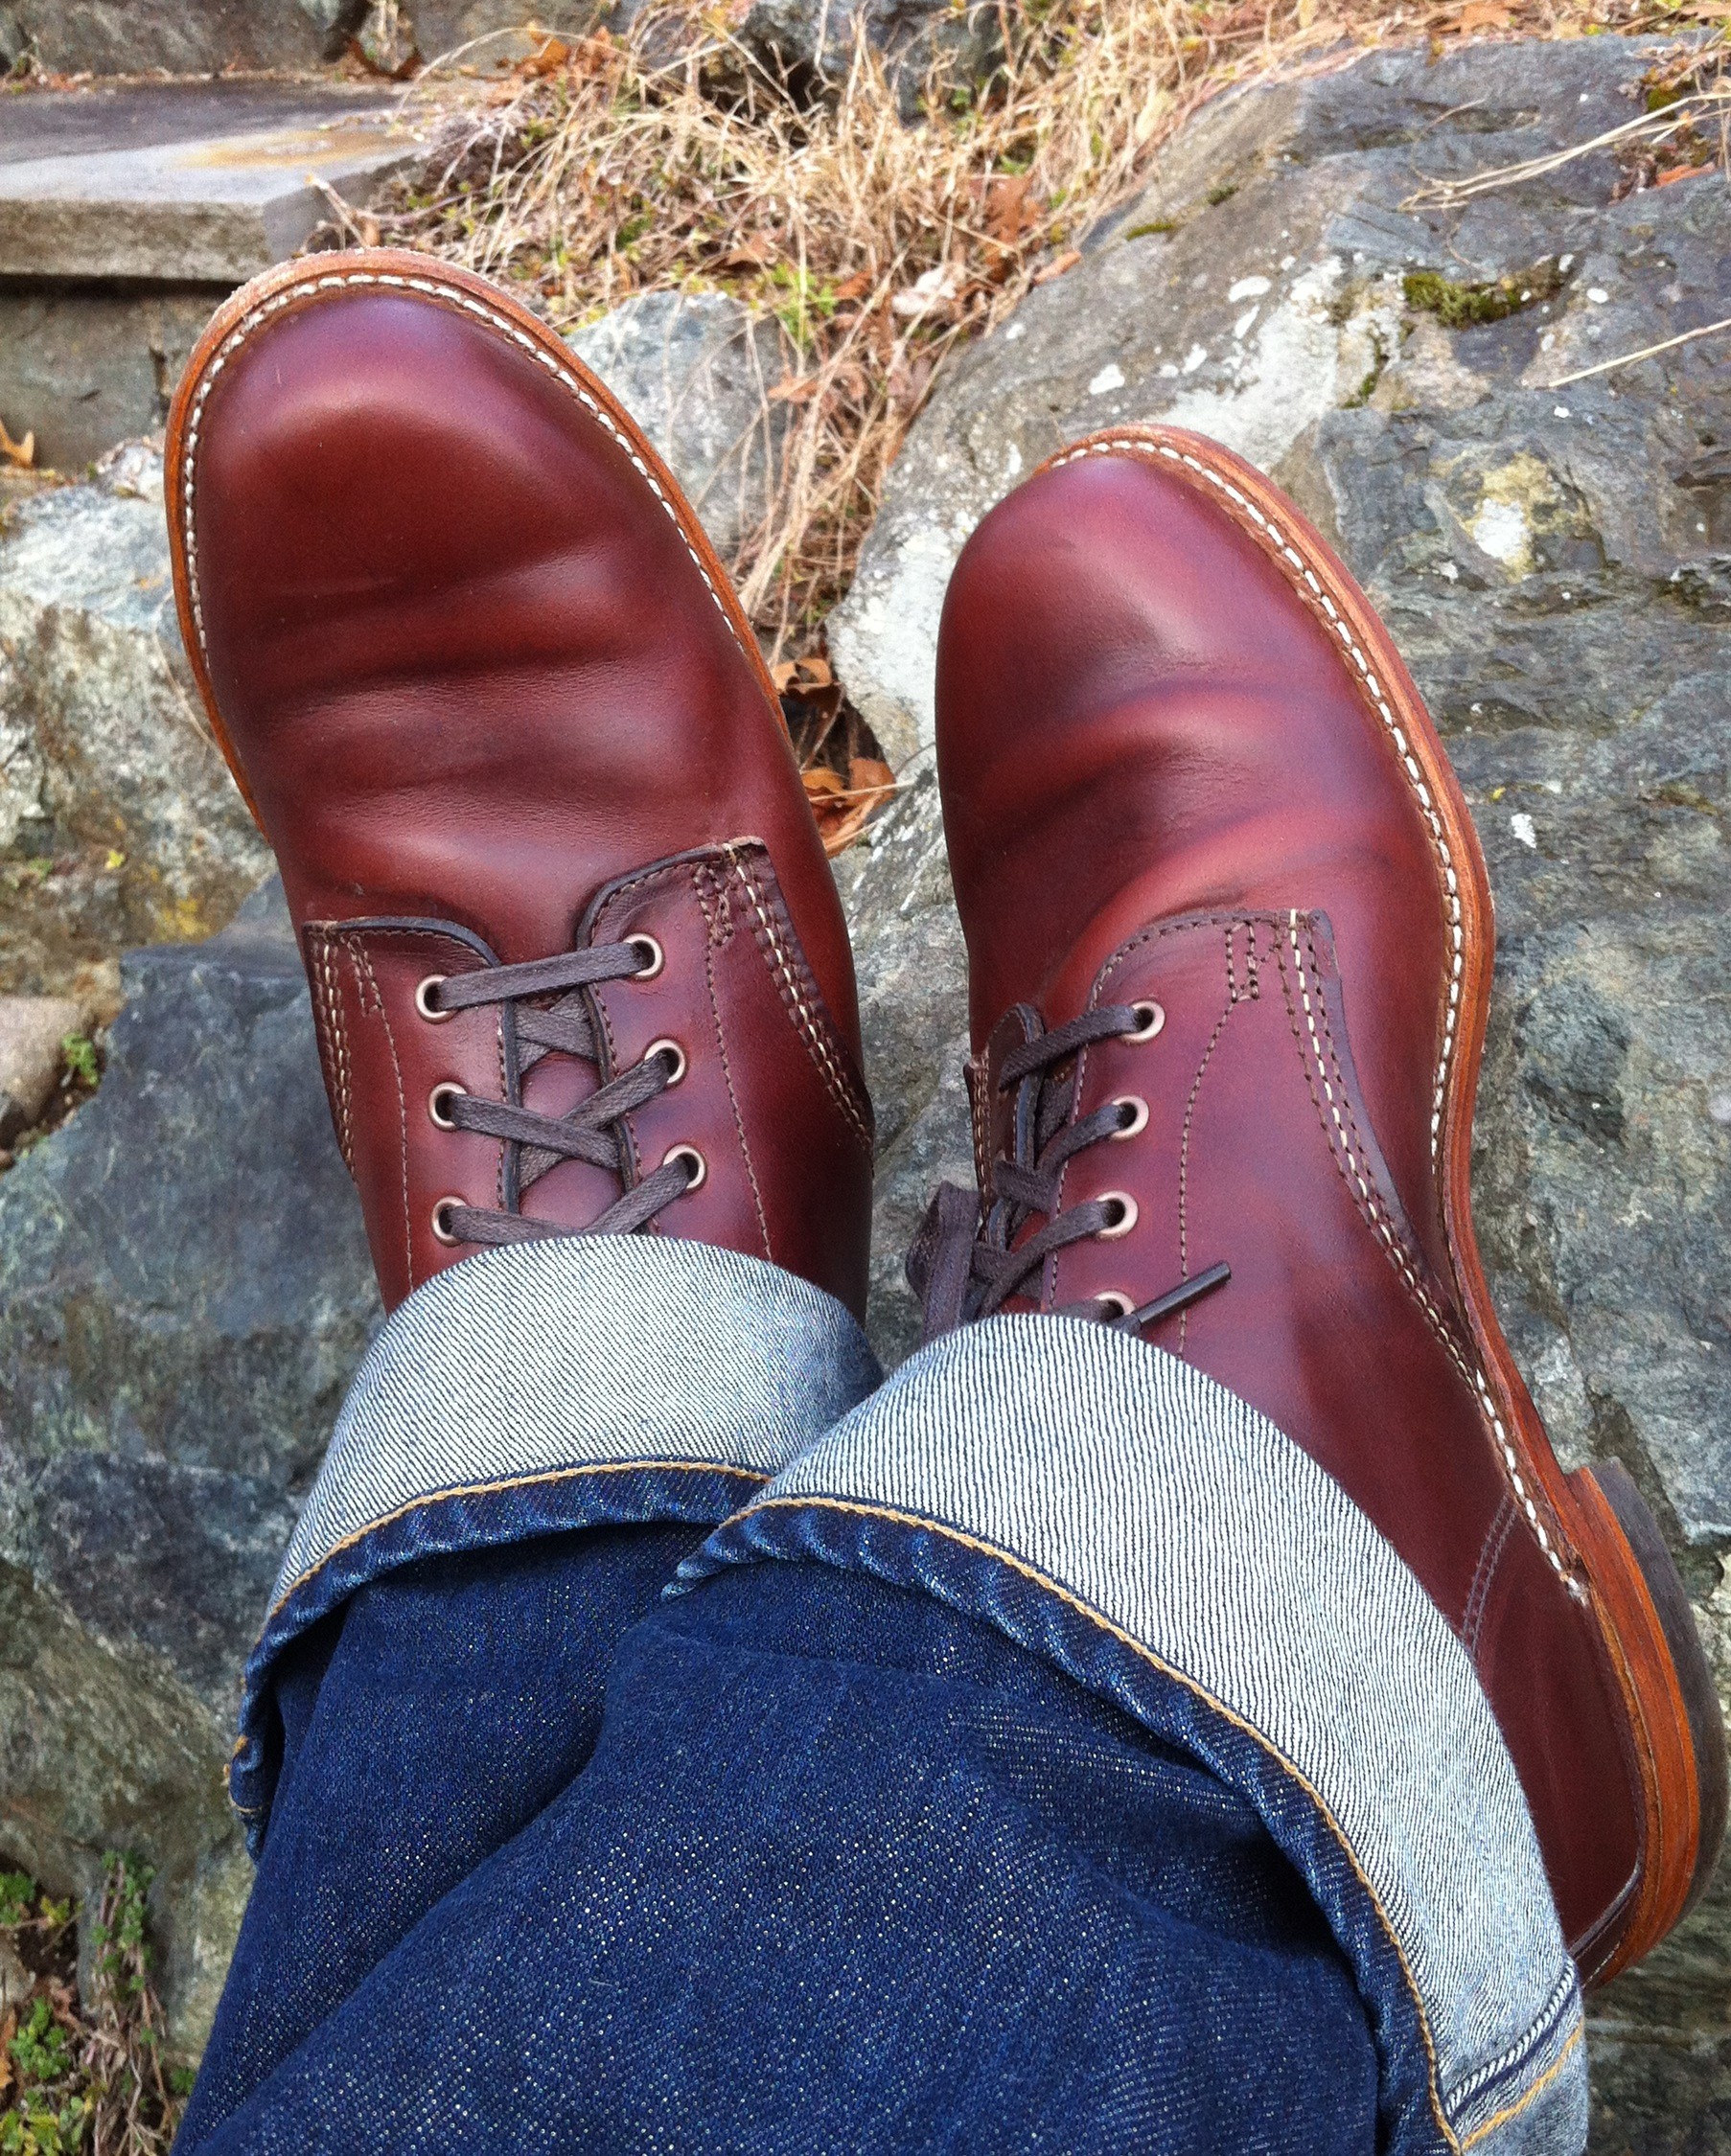 Wolverine 1000 Mile. Wolverine Boots 1000 Miles. Wolverine 1000 Mile Cordovan no 8. Wolverine 1000 Mile Plain-Toe Rugged Boot.